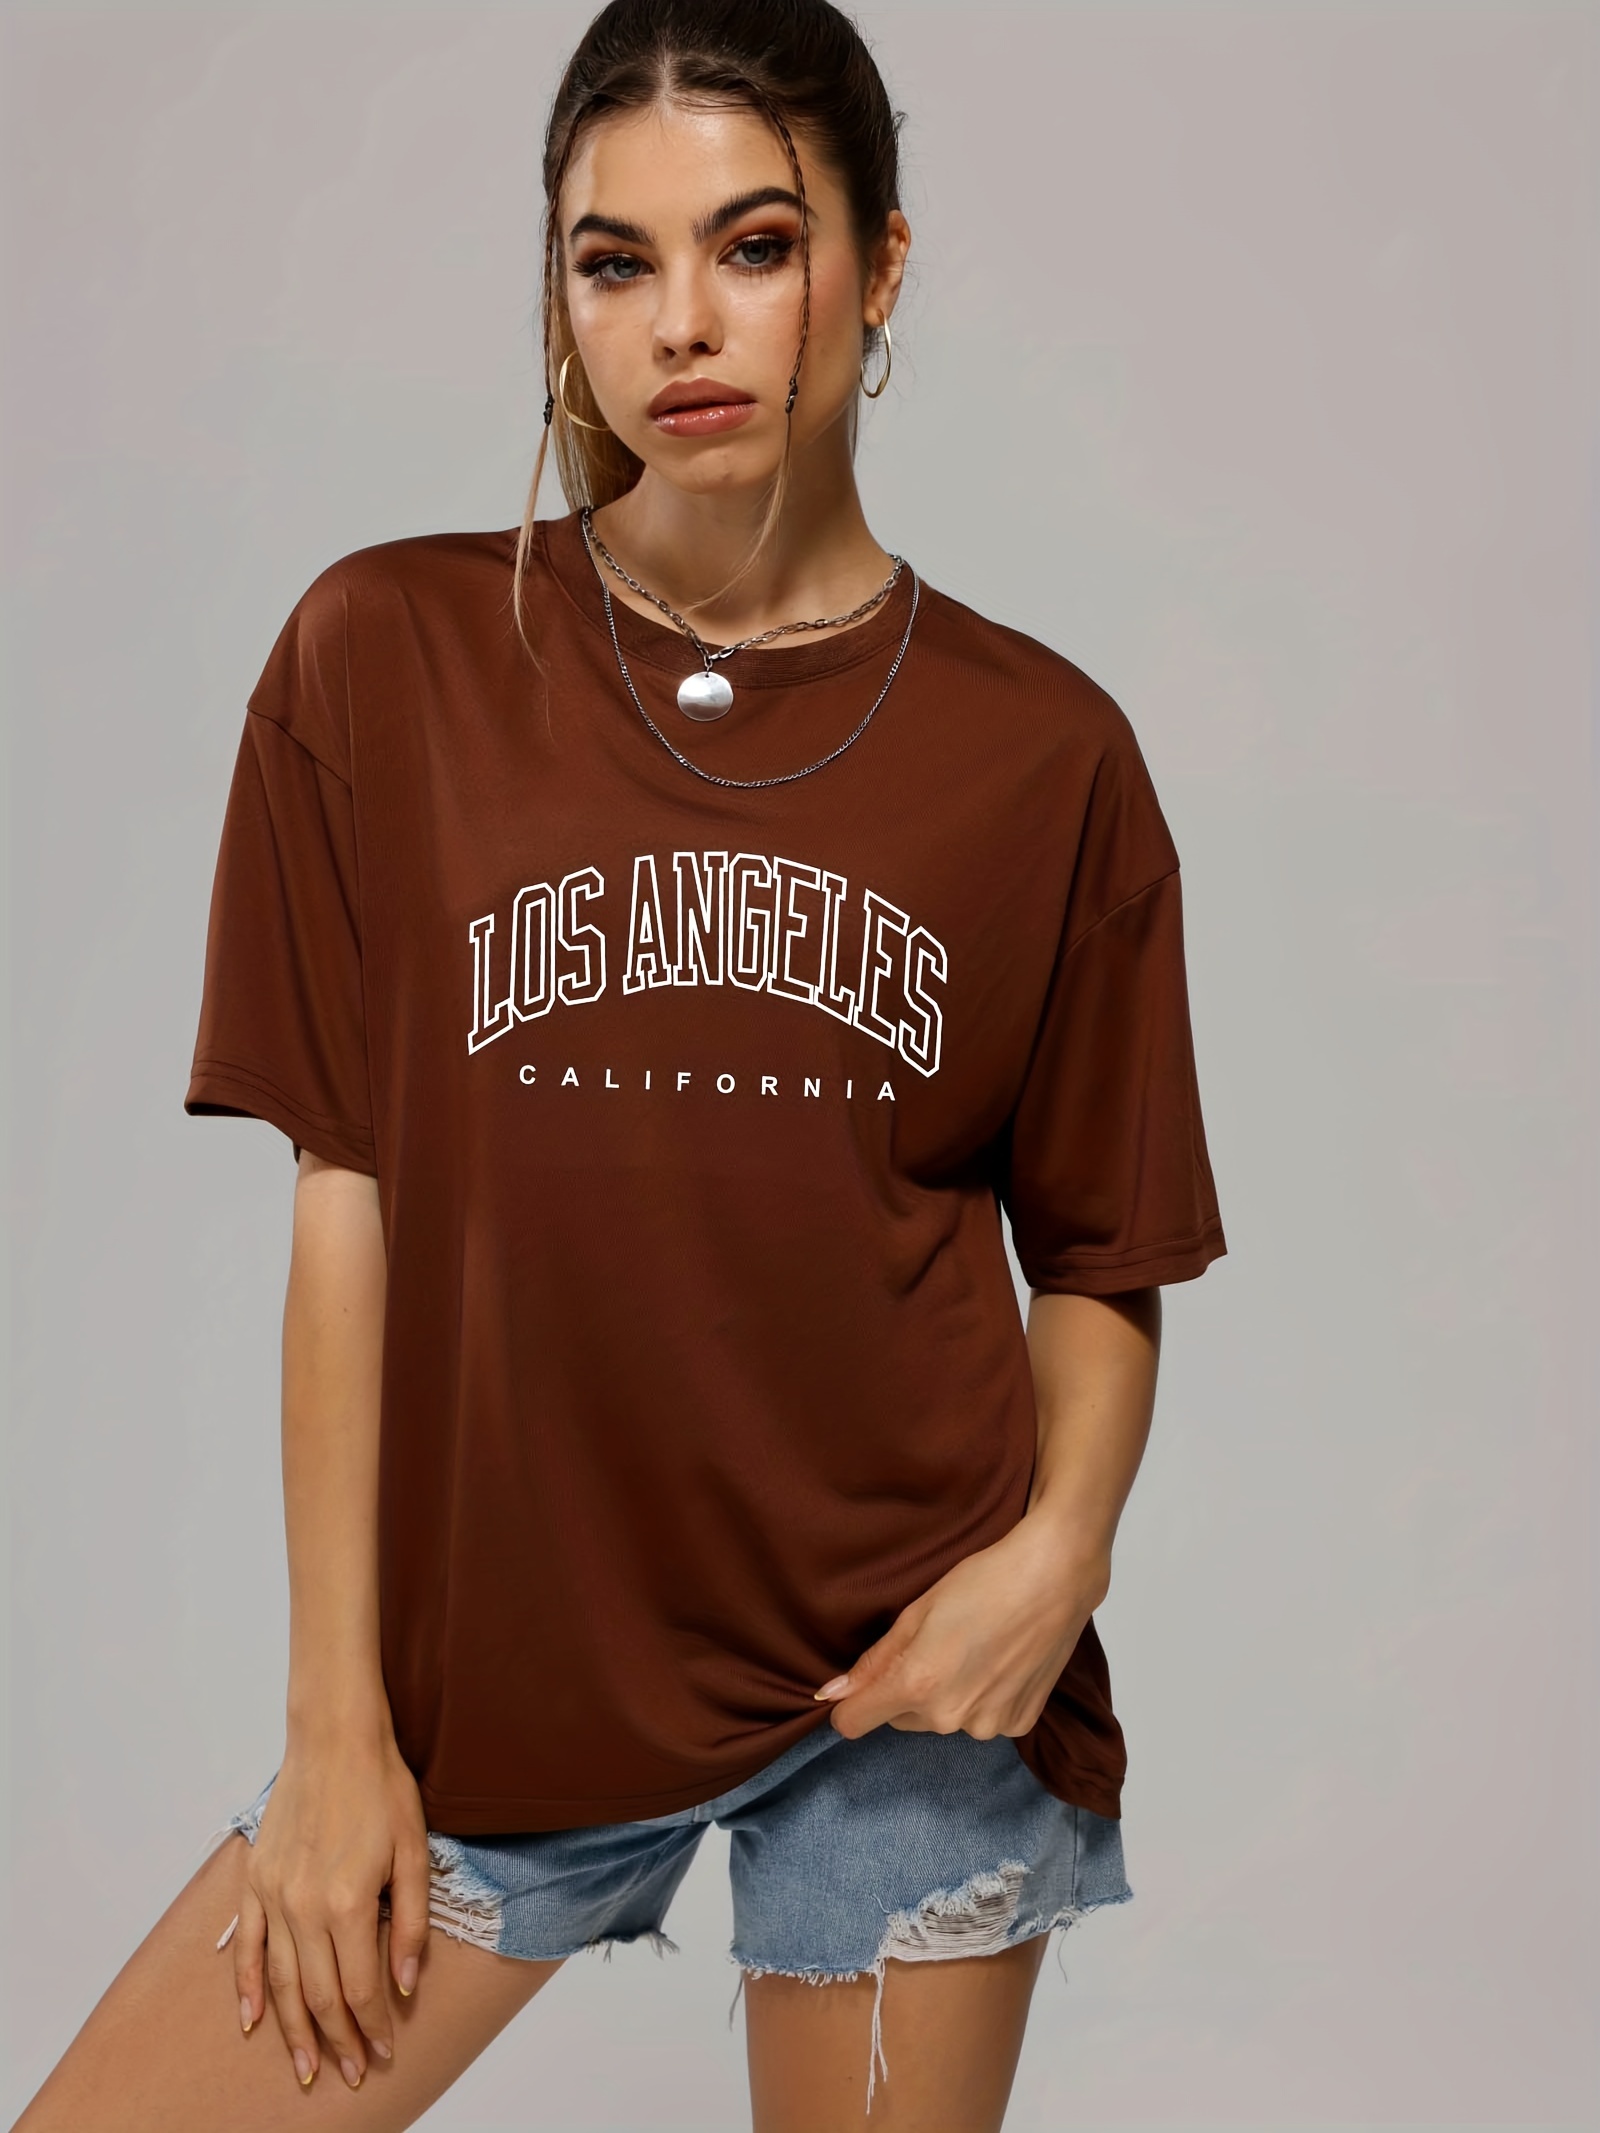 KECKS Women's Shirts Women's Tops Shirts for Women Letter Graphic  Drawstring Side Tee (Color : Brown, Size : Small) at  Women's  Clothing store